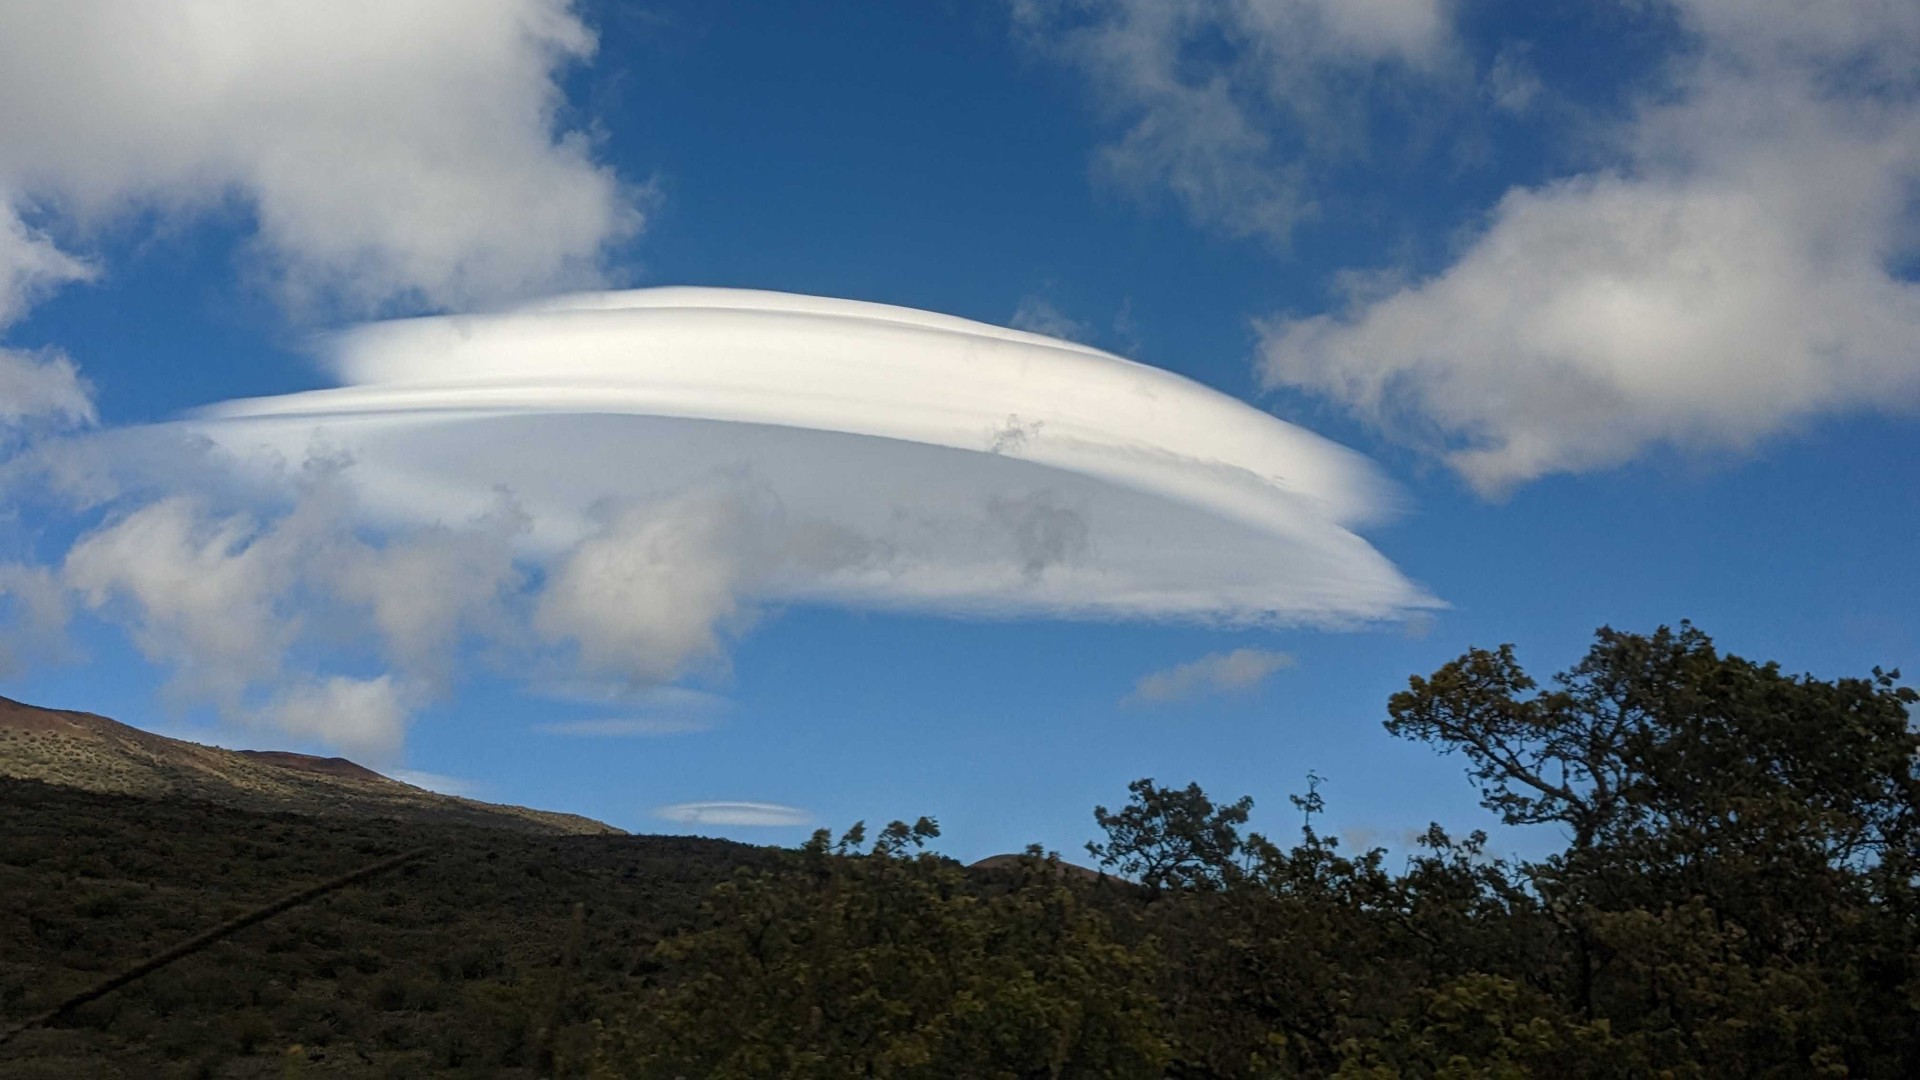 UFO-shaped clouds invade skies over observatory in Hawaii (photos) | Space